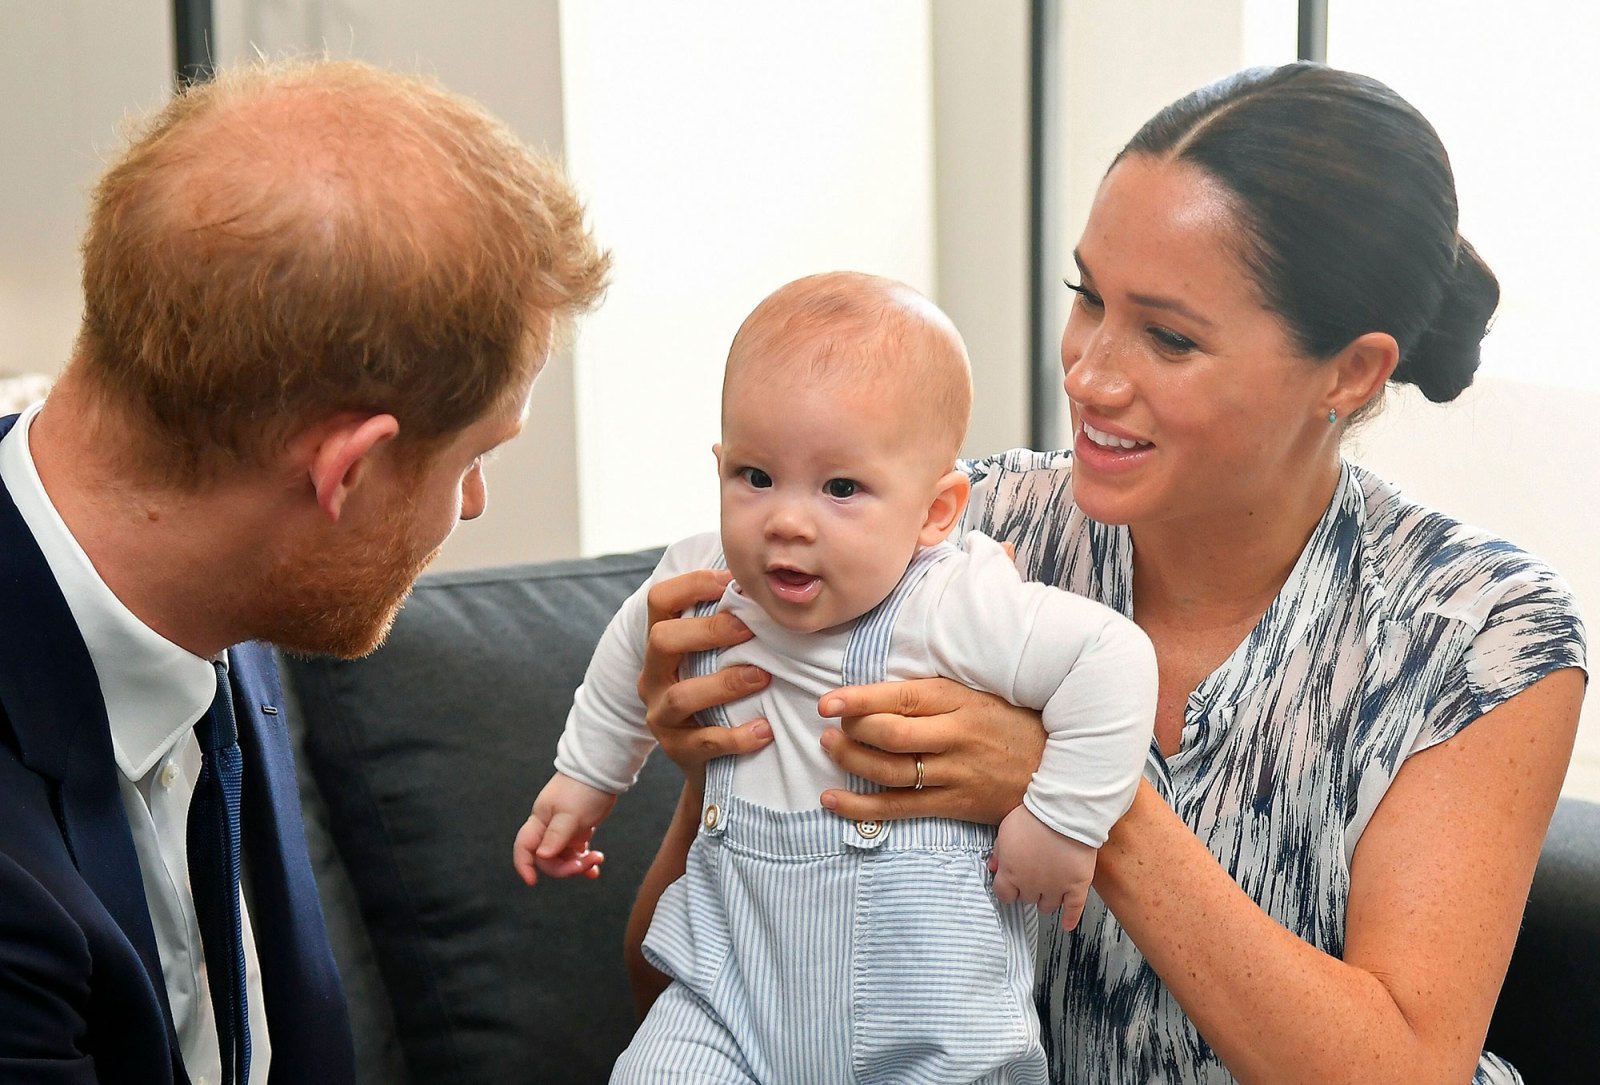 Royal Family Sends Prince Harry and Meghan Markle Son Archie Love on His 2nd Birthday 2